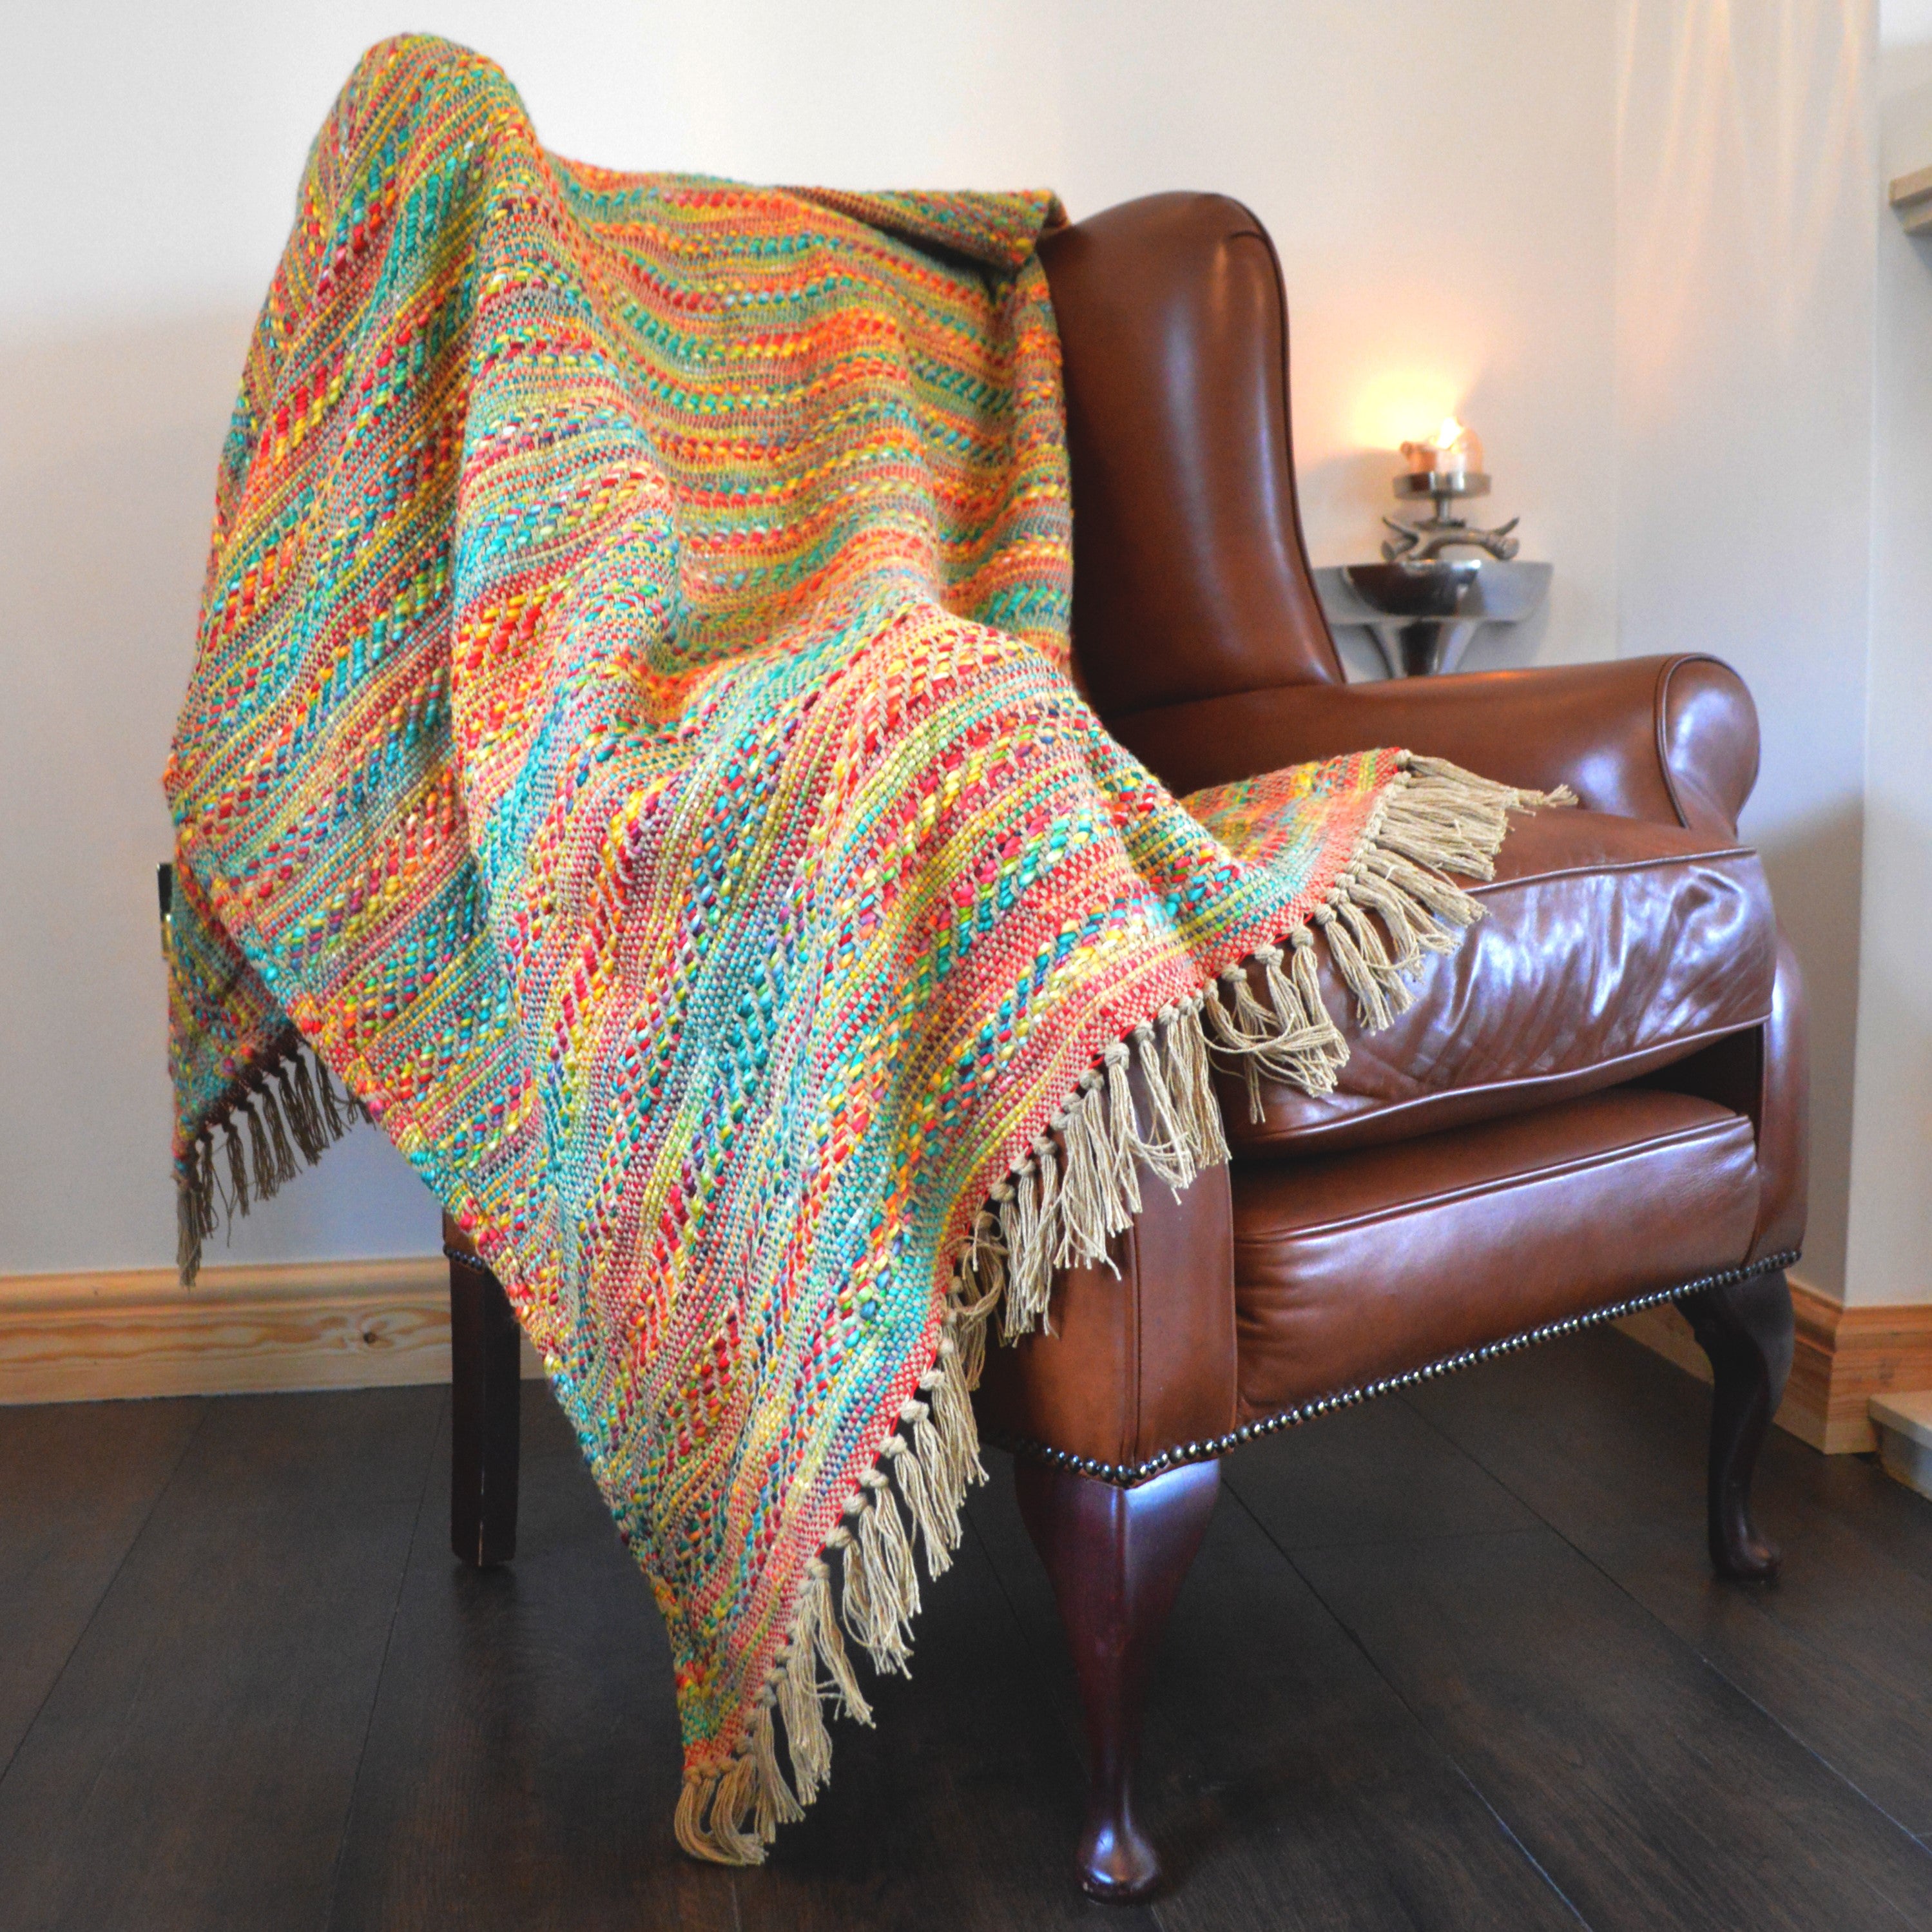 Colourful Throw for Living Room - Stylish blanket with tassels